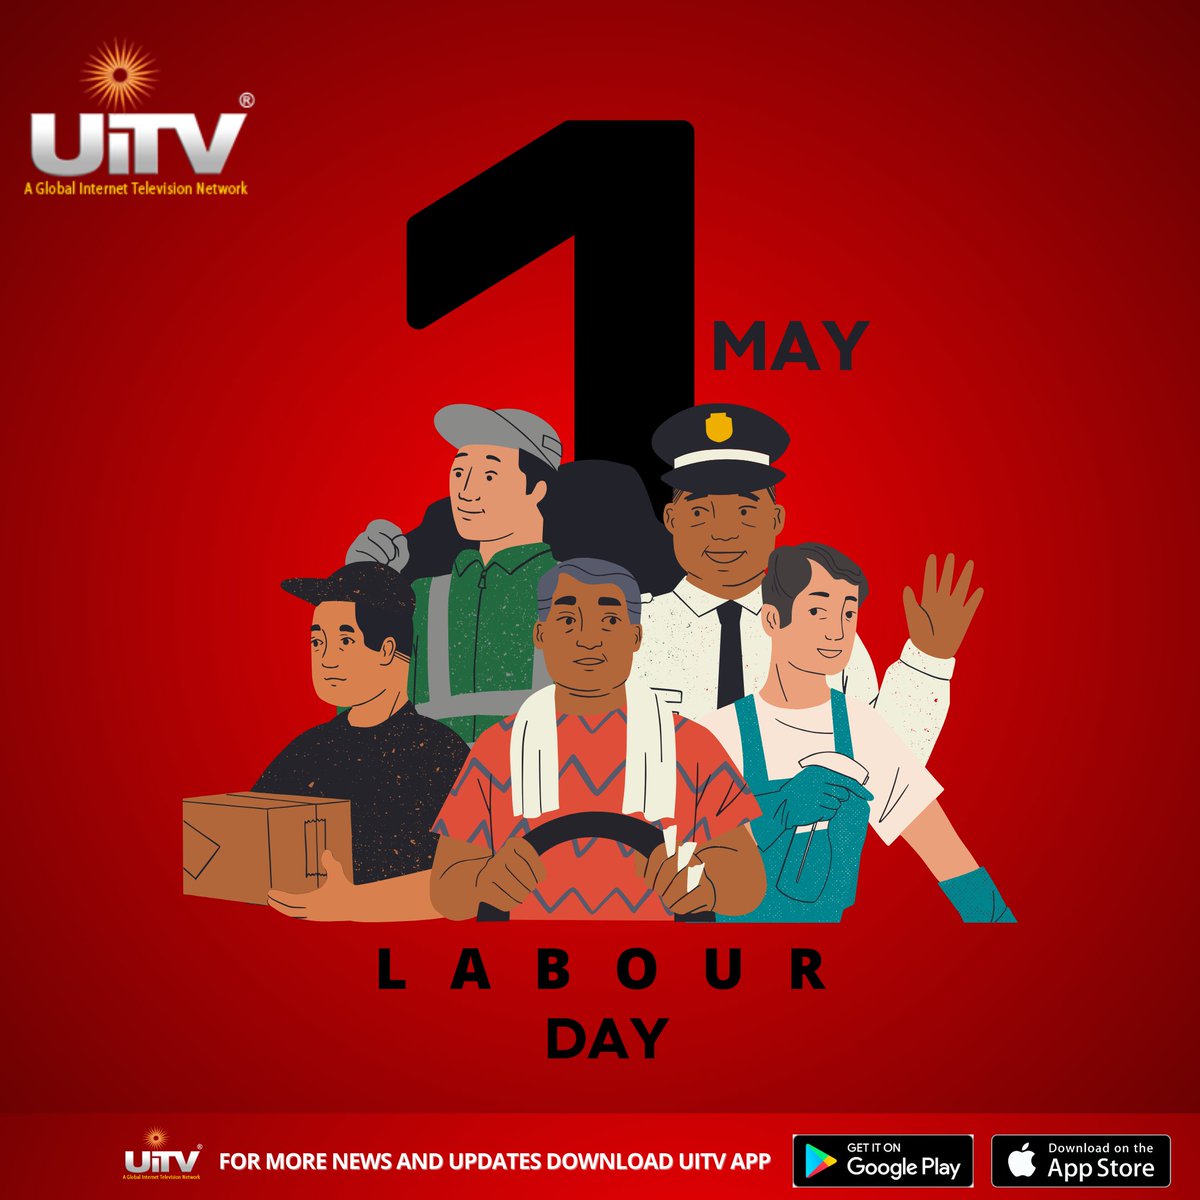 Happy Labour Day, everyone! Today, we celebrate the hard work and dedication of workers around the world. Let's honor their contributions and continue striving for fair wages, safe working conditions. 💪🌍 #LabourDay #May1st #WorkersRights #FairWages #EqualOpportunity